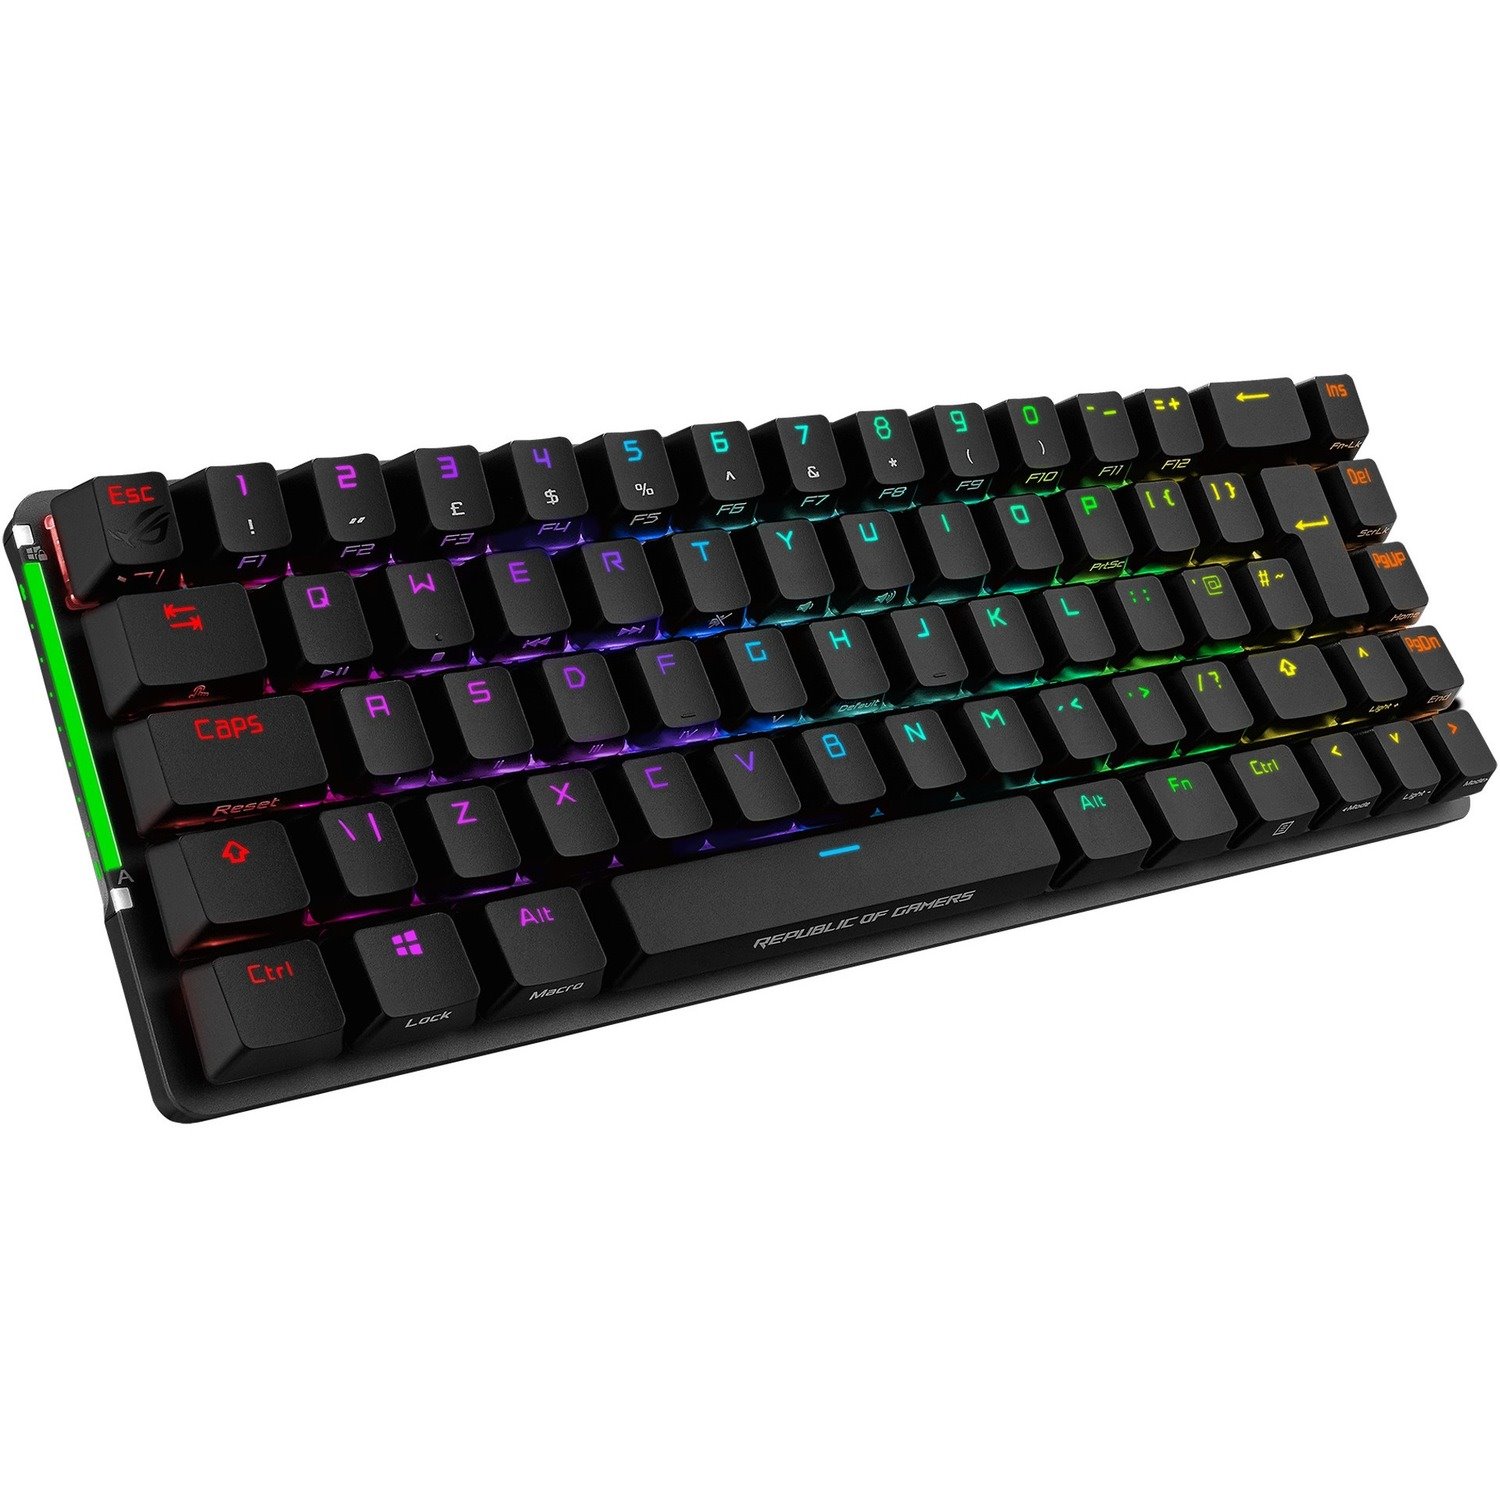 Asus ROG Falchion NX Gaming Keyboard - Wired/Wireless Connectivity - USB 2.0 Interface - RGB LED - Black, Grey